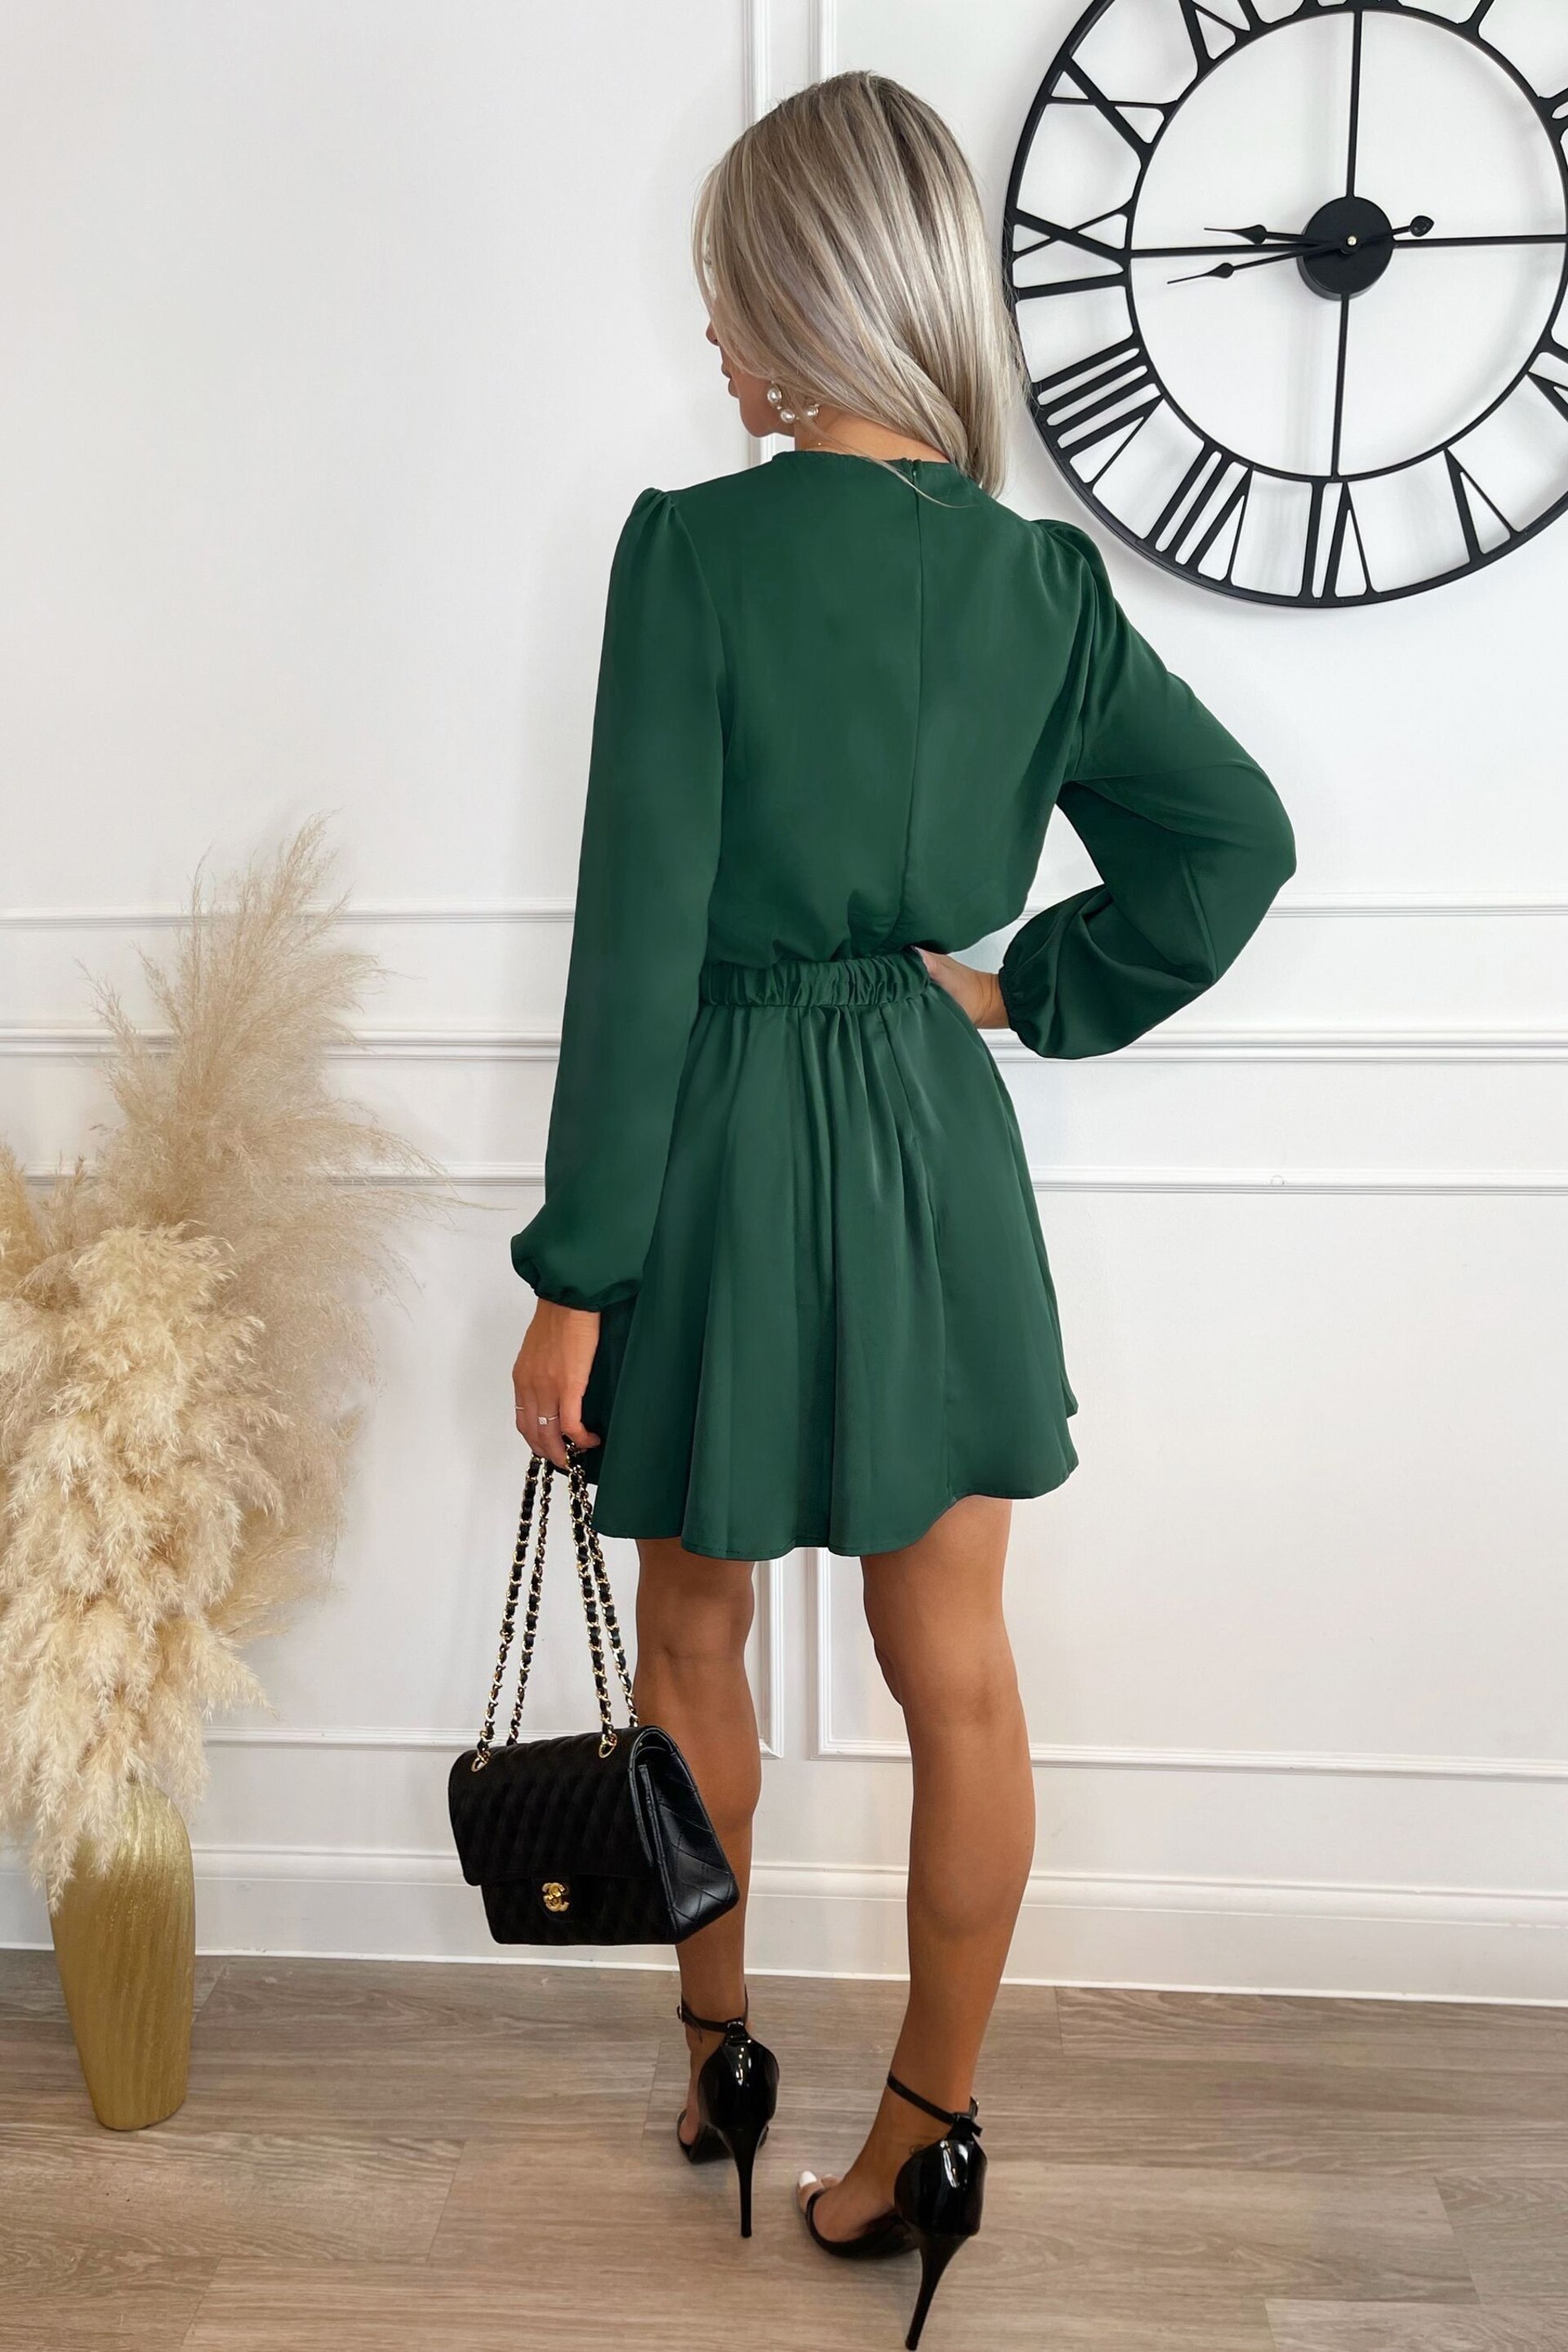 AX Paris Green Long Sleeve Belted Skater Dress - Image 2 of 3